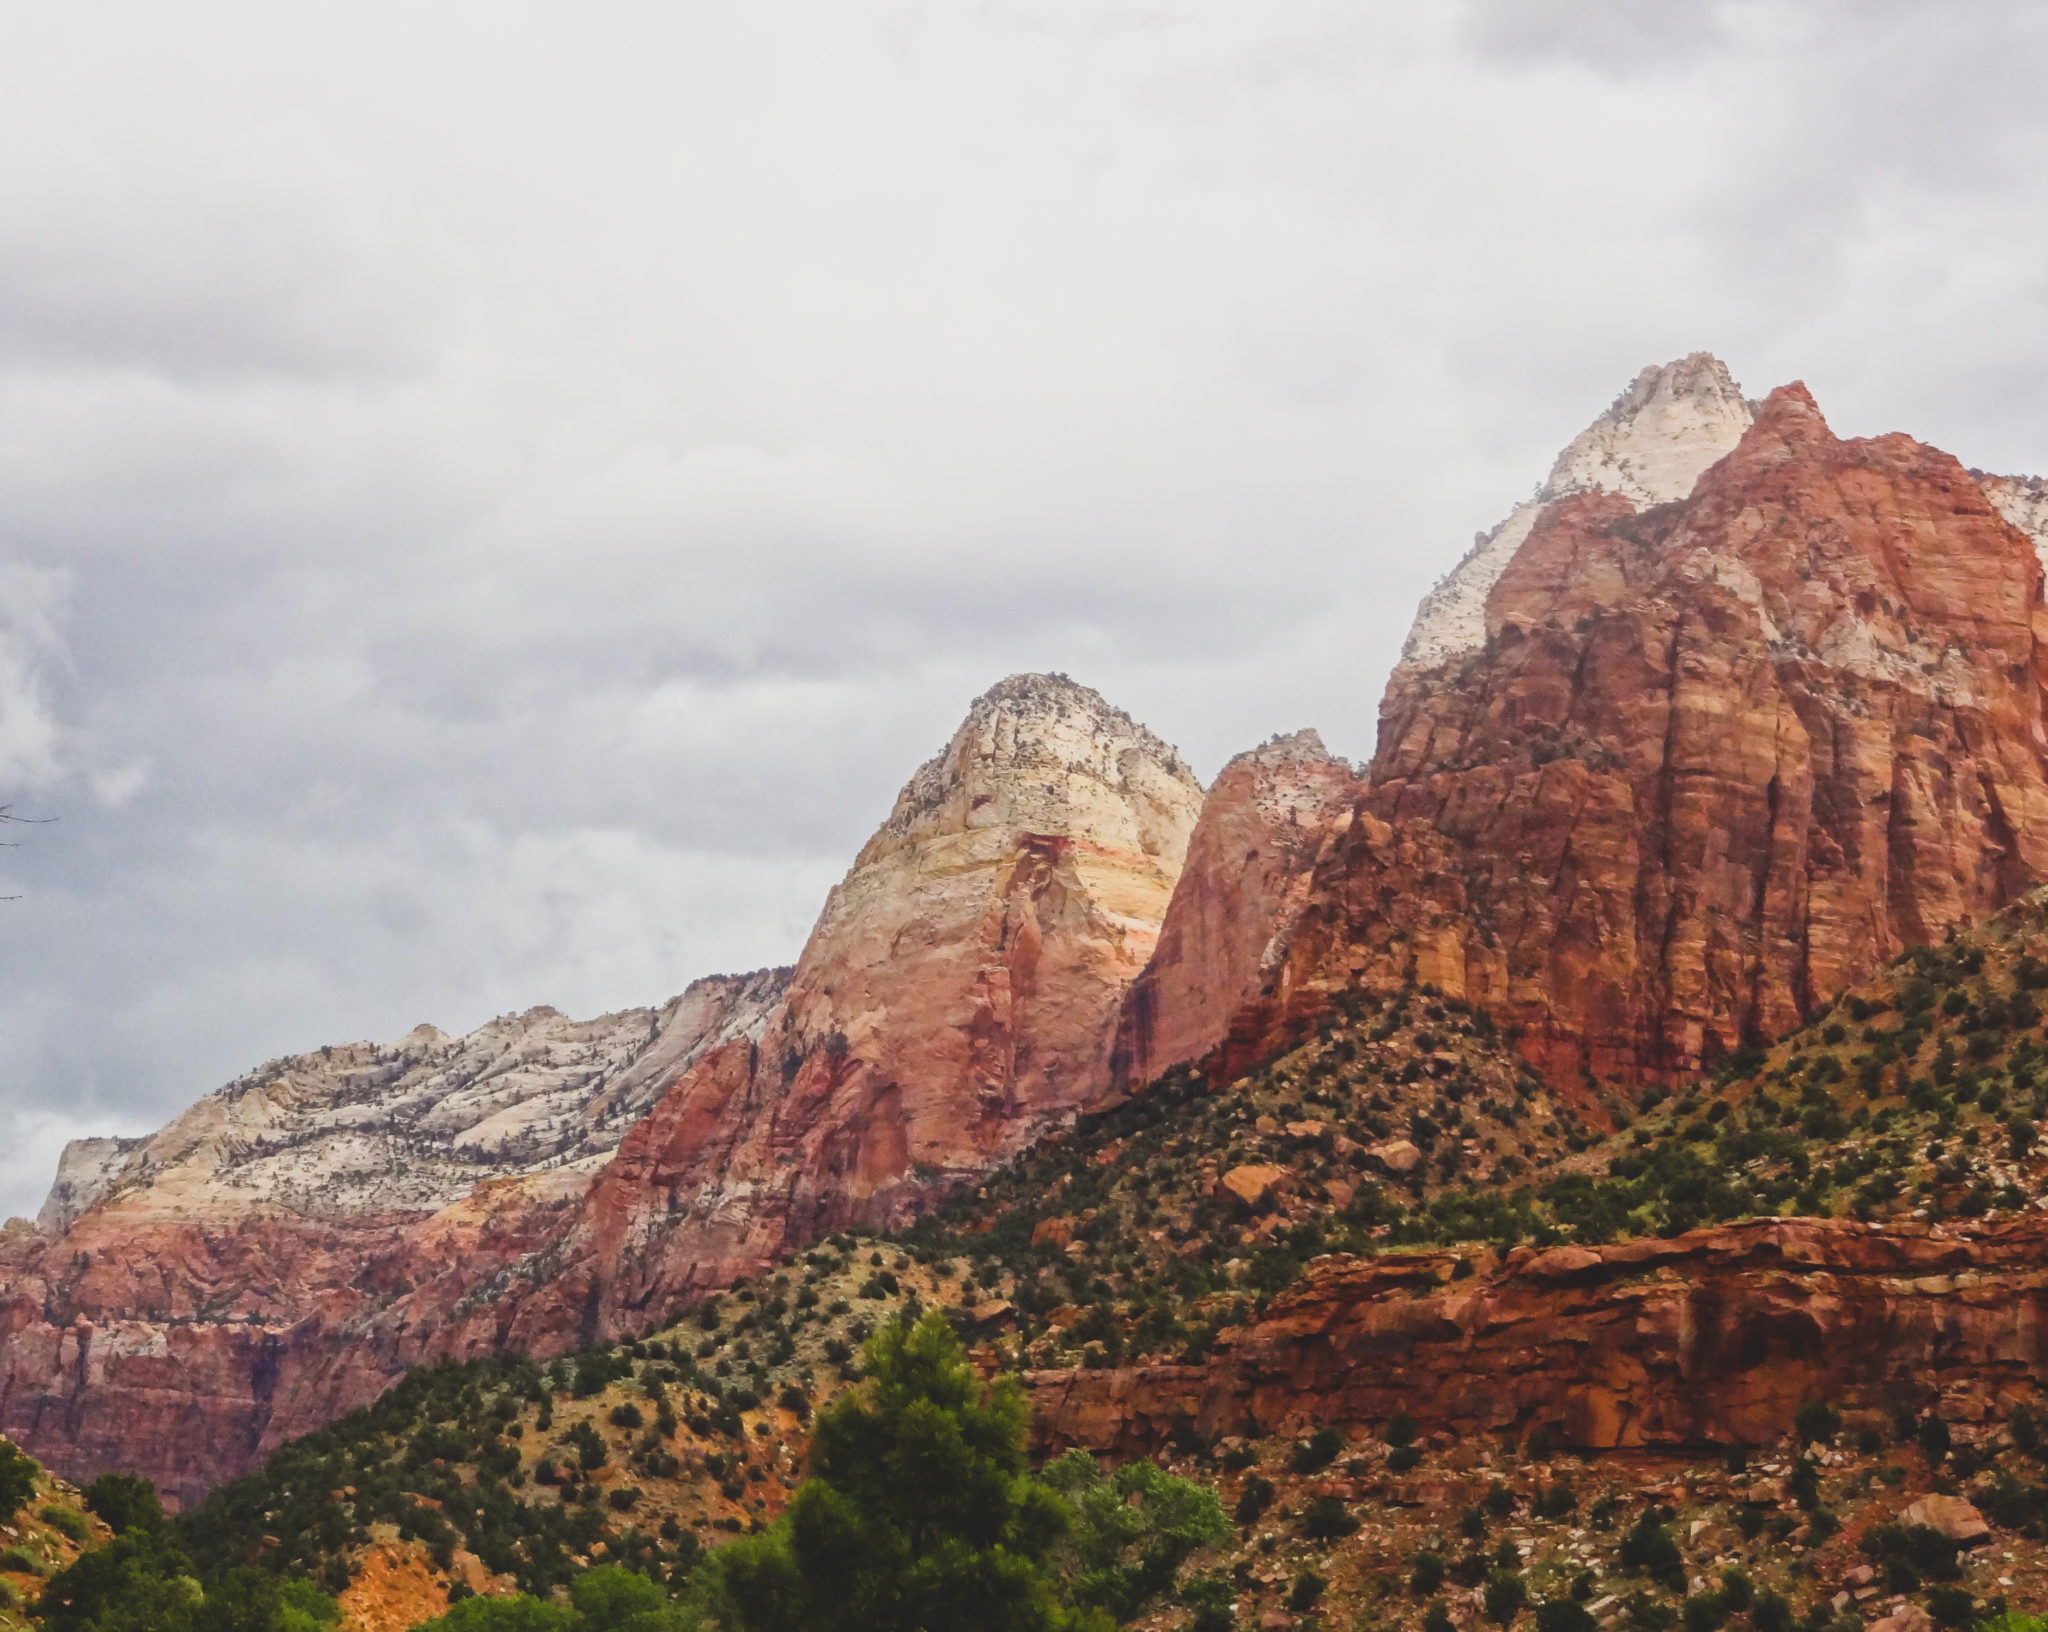 Zion is a majestic park! This is a must-visit place on any road trip from Las Vegas!